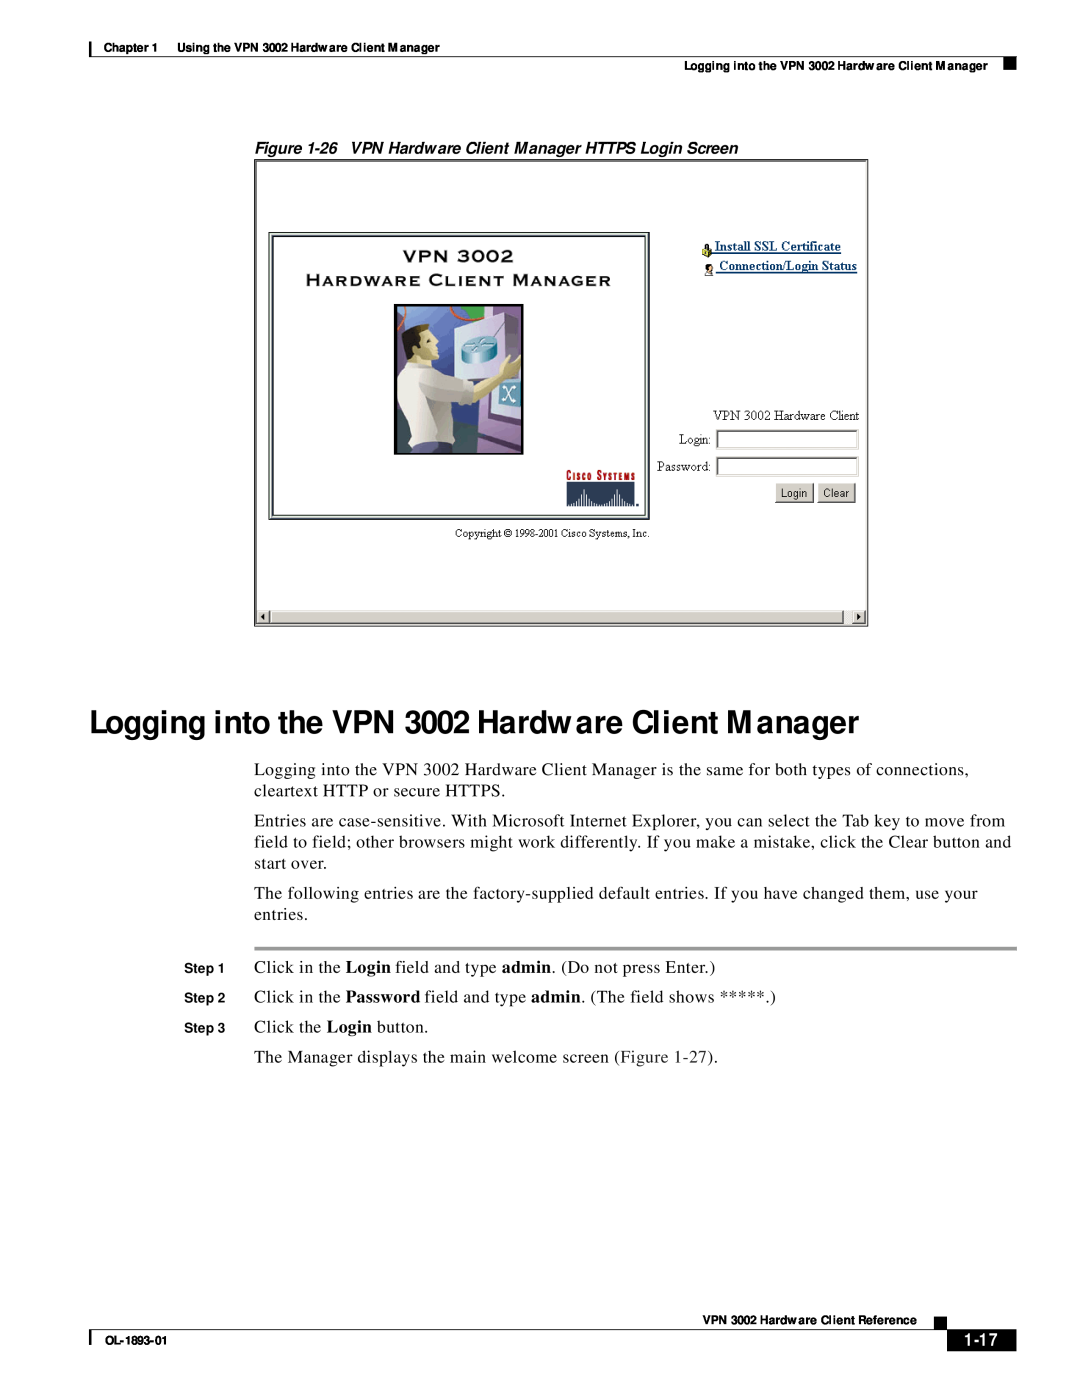 Cisco Systems manual Logging into the VPN 3002 Hardware Client Manager, 1-17 